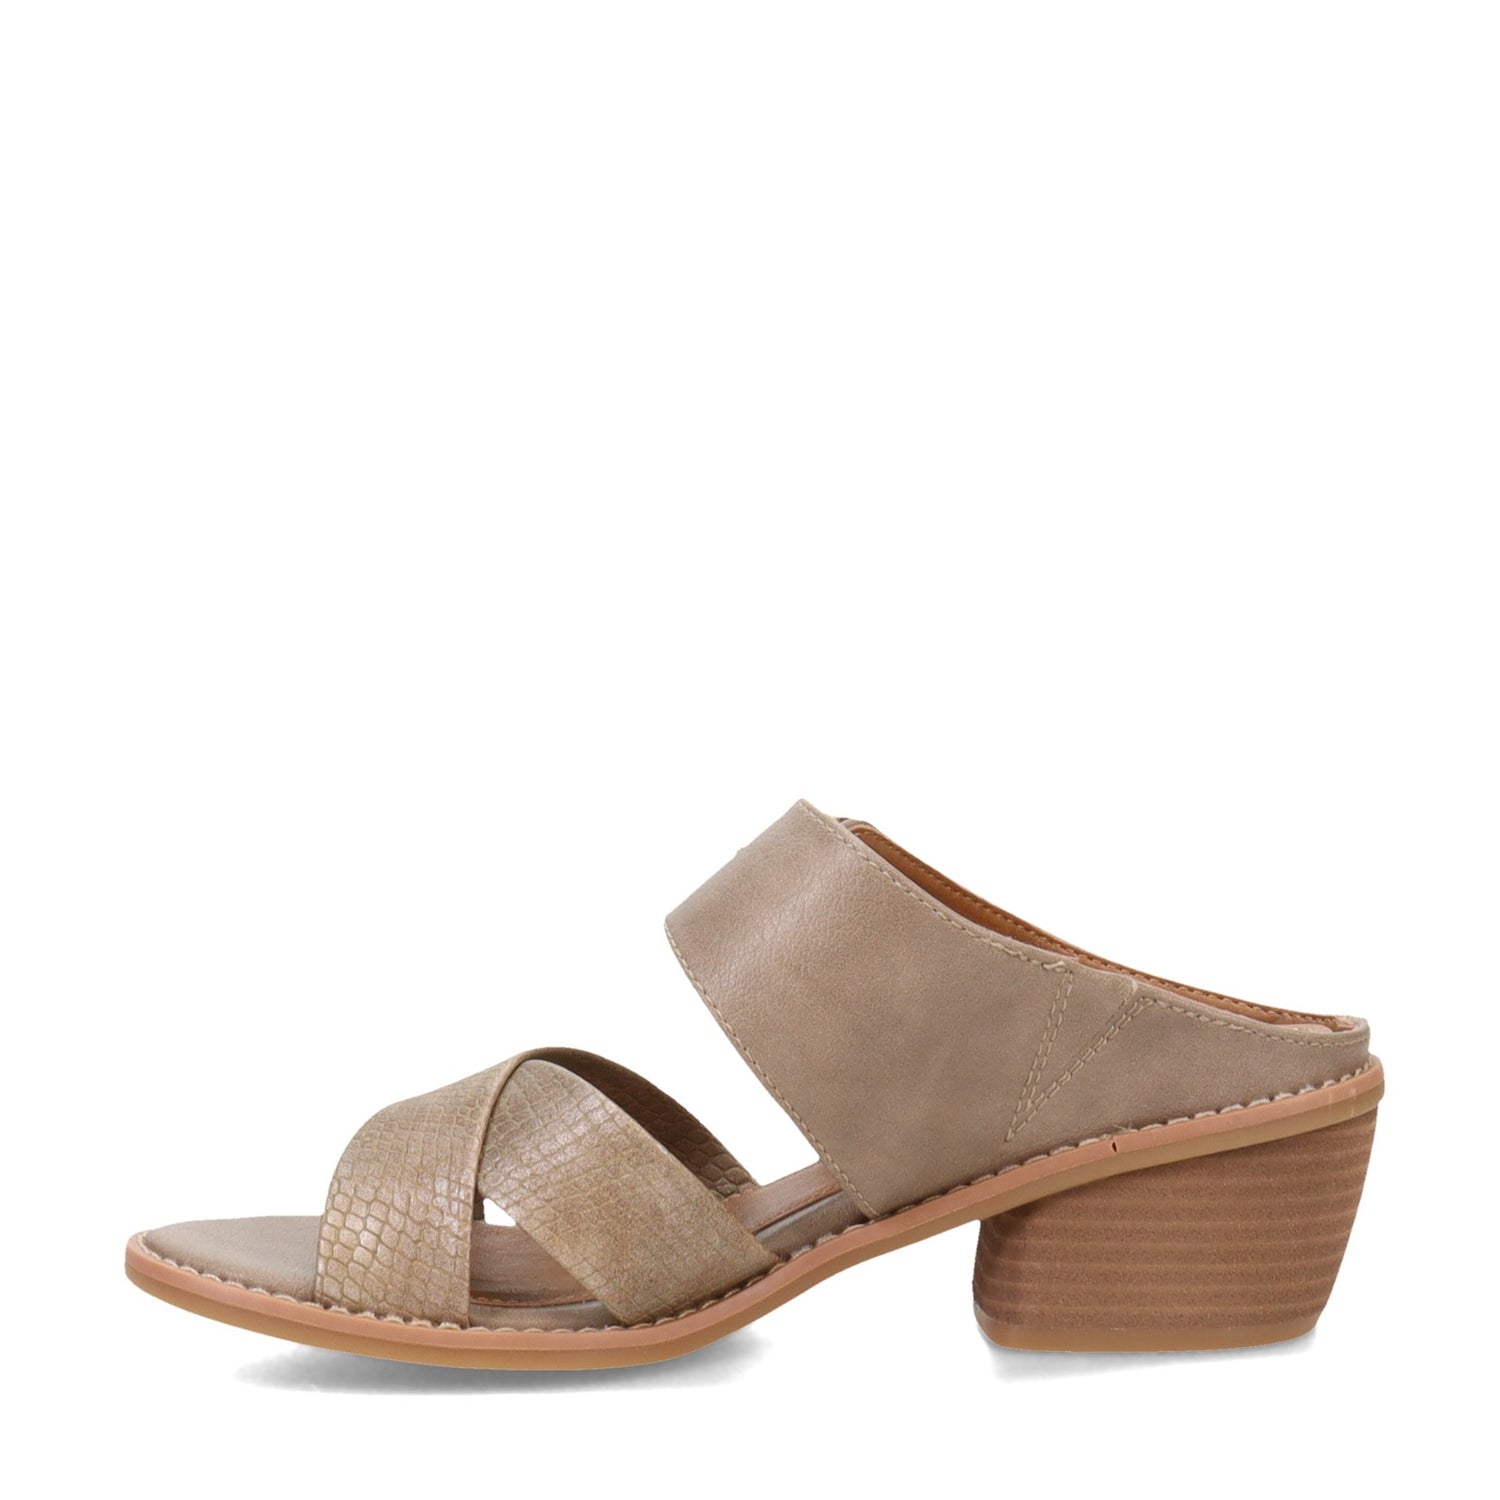 Peltz Shoes  Women's Eurosoft by Sofft Cyleigh Sandal TAUPE ES0035136